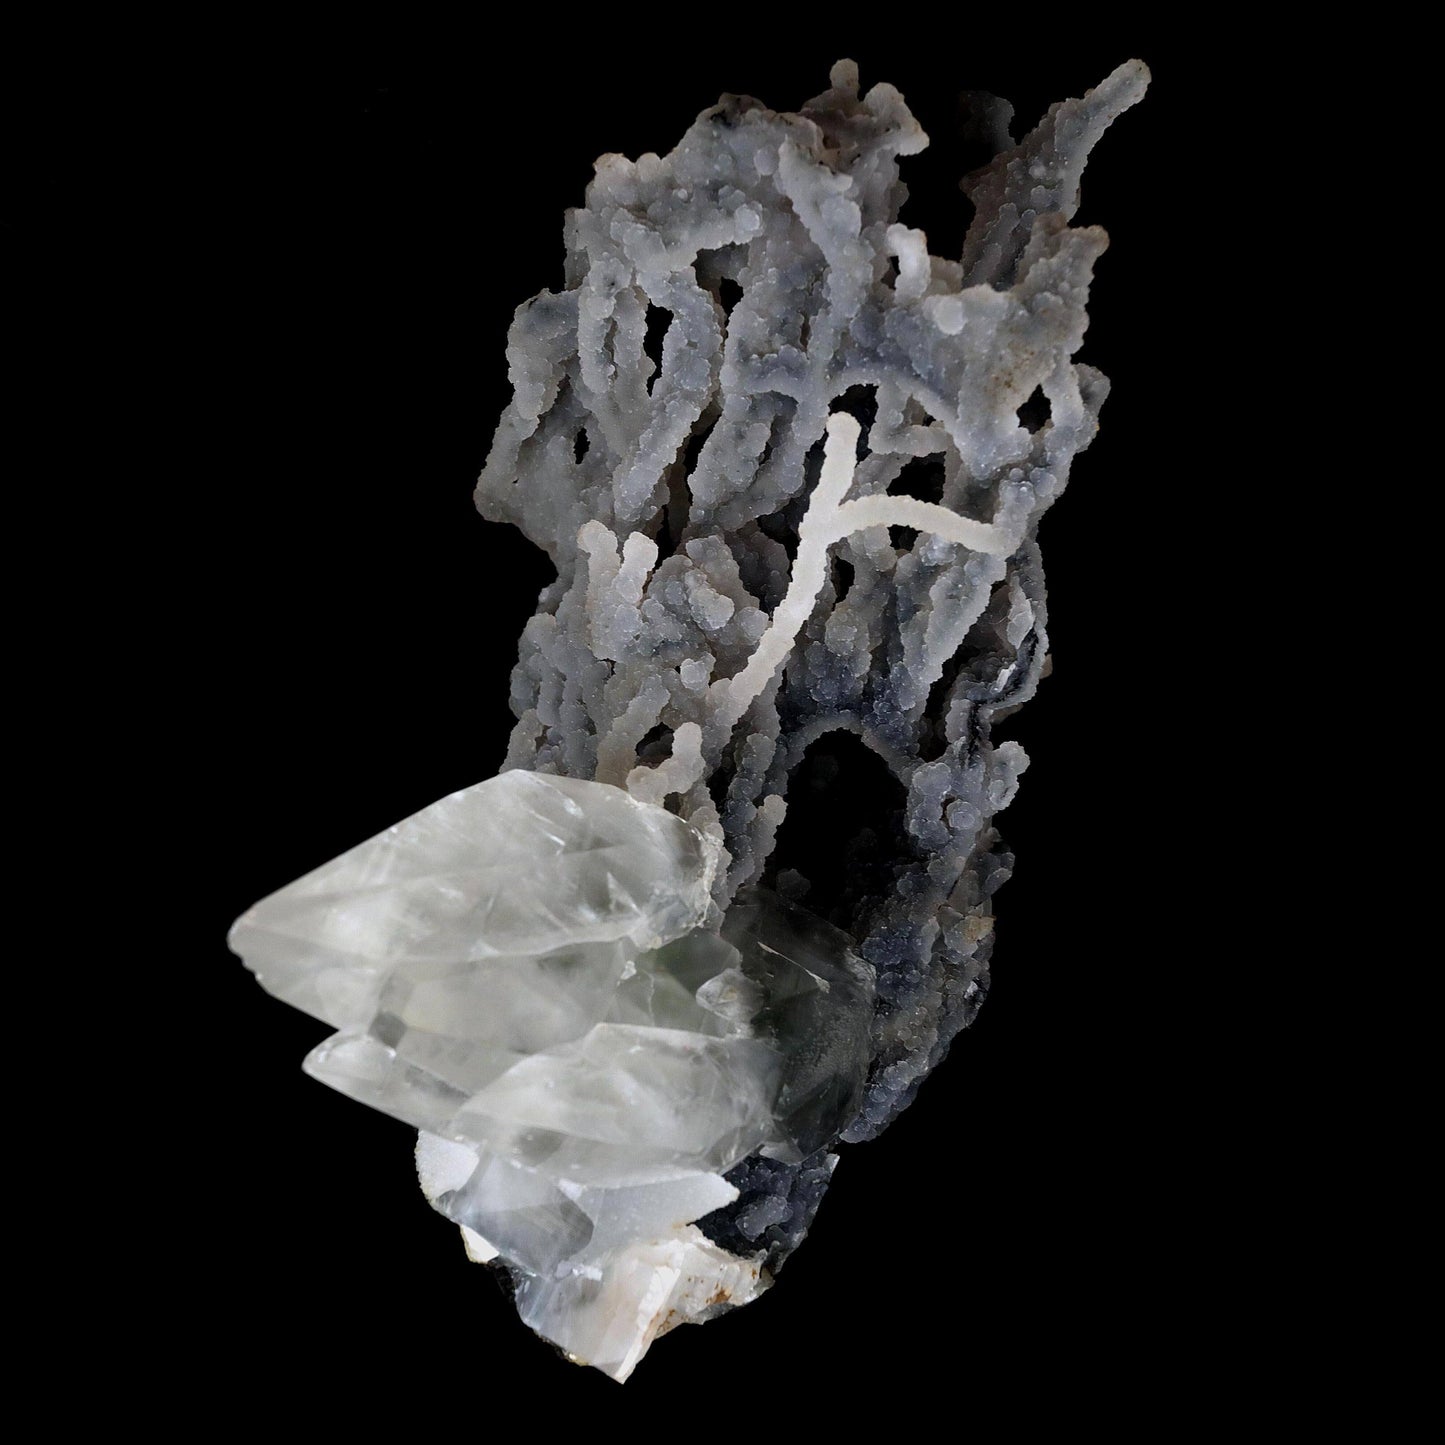 Pointed Calcite Crystal On Chalcedony Coral Formation Natural Mineral Specimen # B 4642 Calcite Superb Minerals 